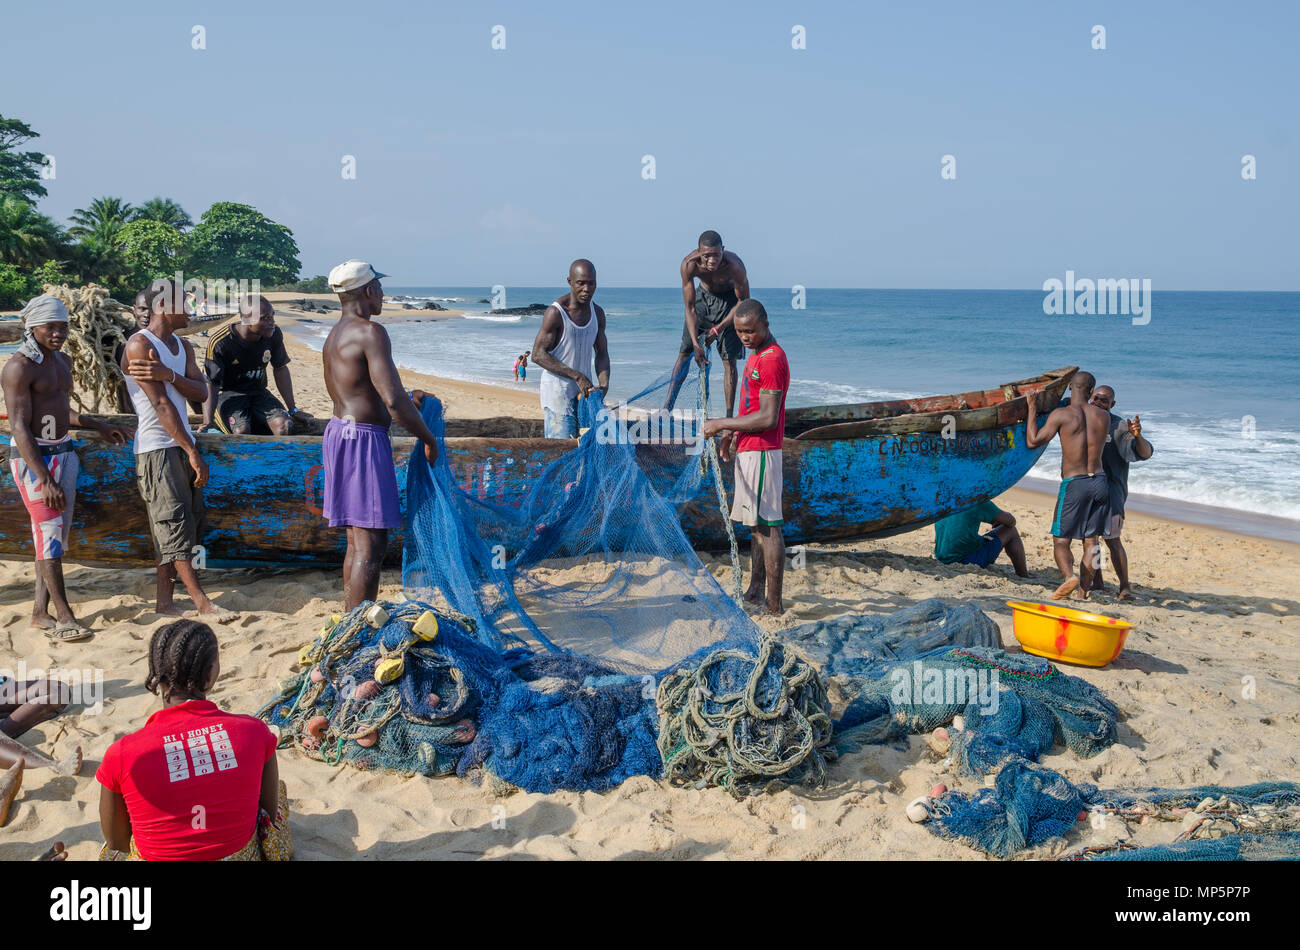 Fishermen sorting nets on wooden boat at beach Stock Photo